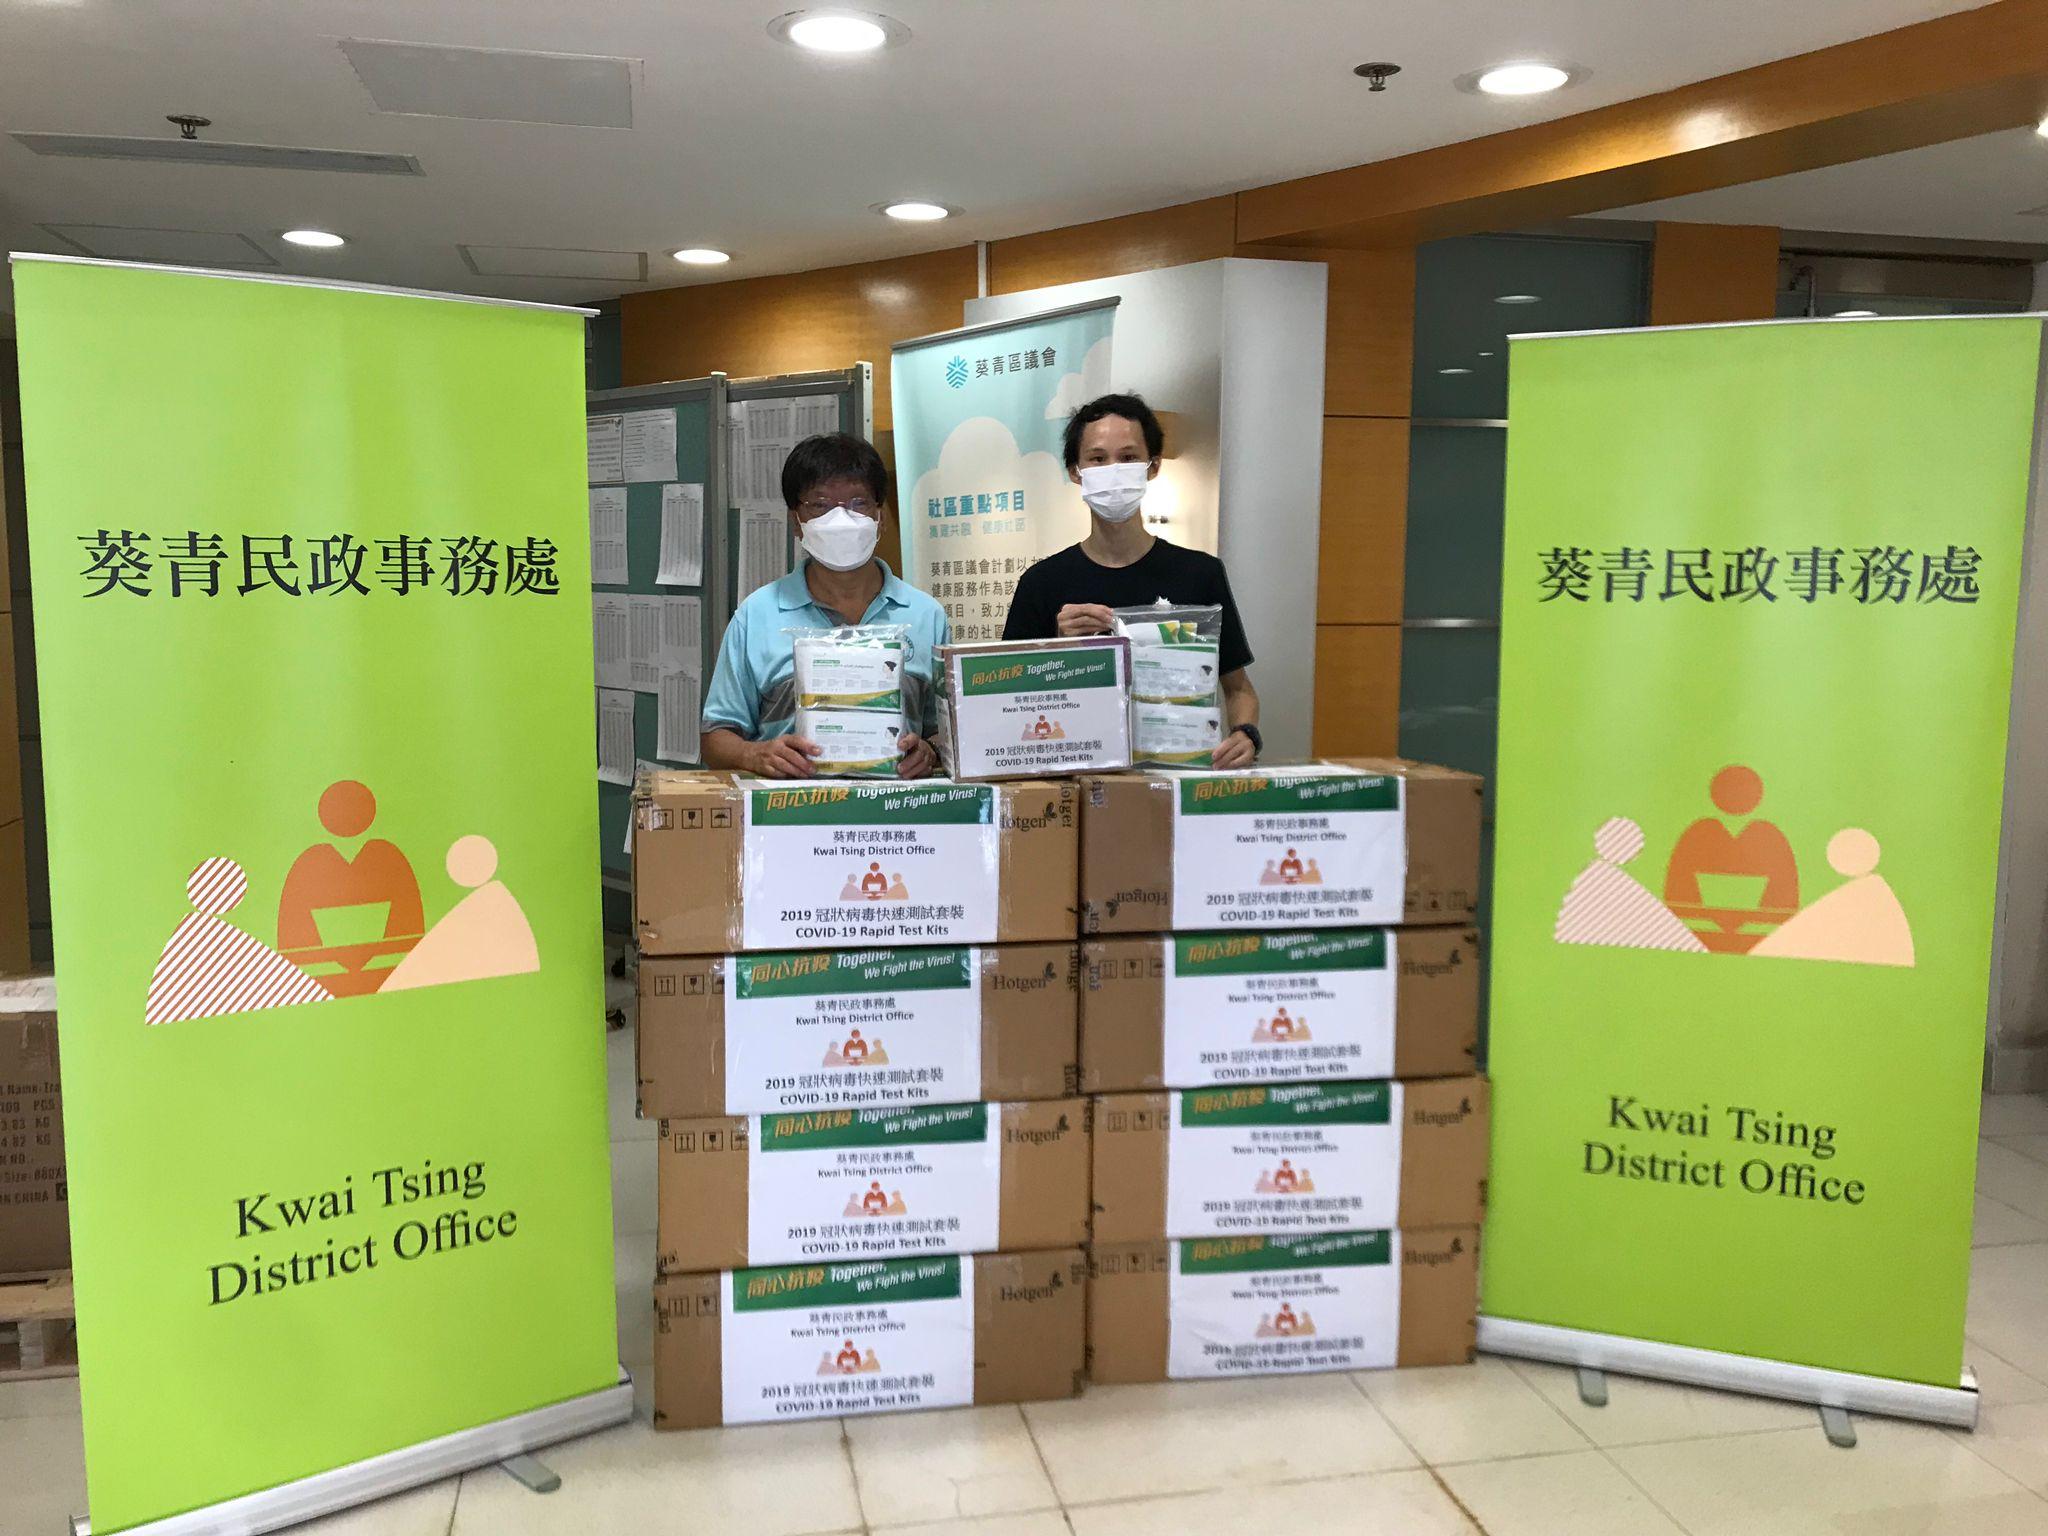 The Kwai Tsing District Office today (June 18) distributed COVID-19 rapid test kits to households, cleansing workers and property management staff living and working in Kwai Hong Court for voluntary testing through the property management company.